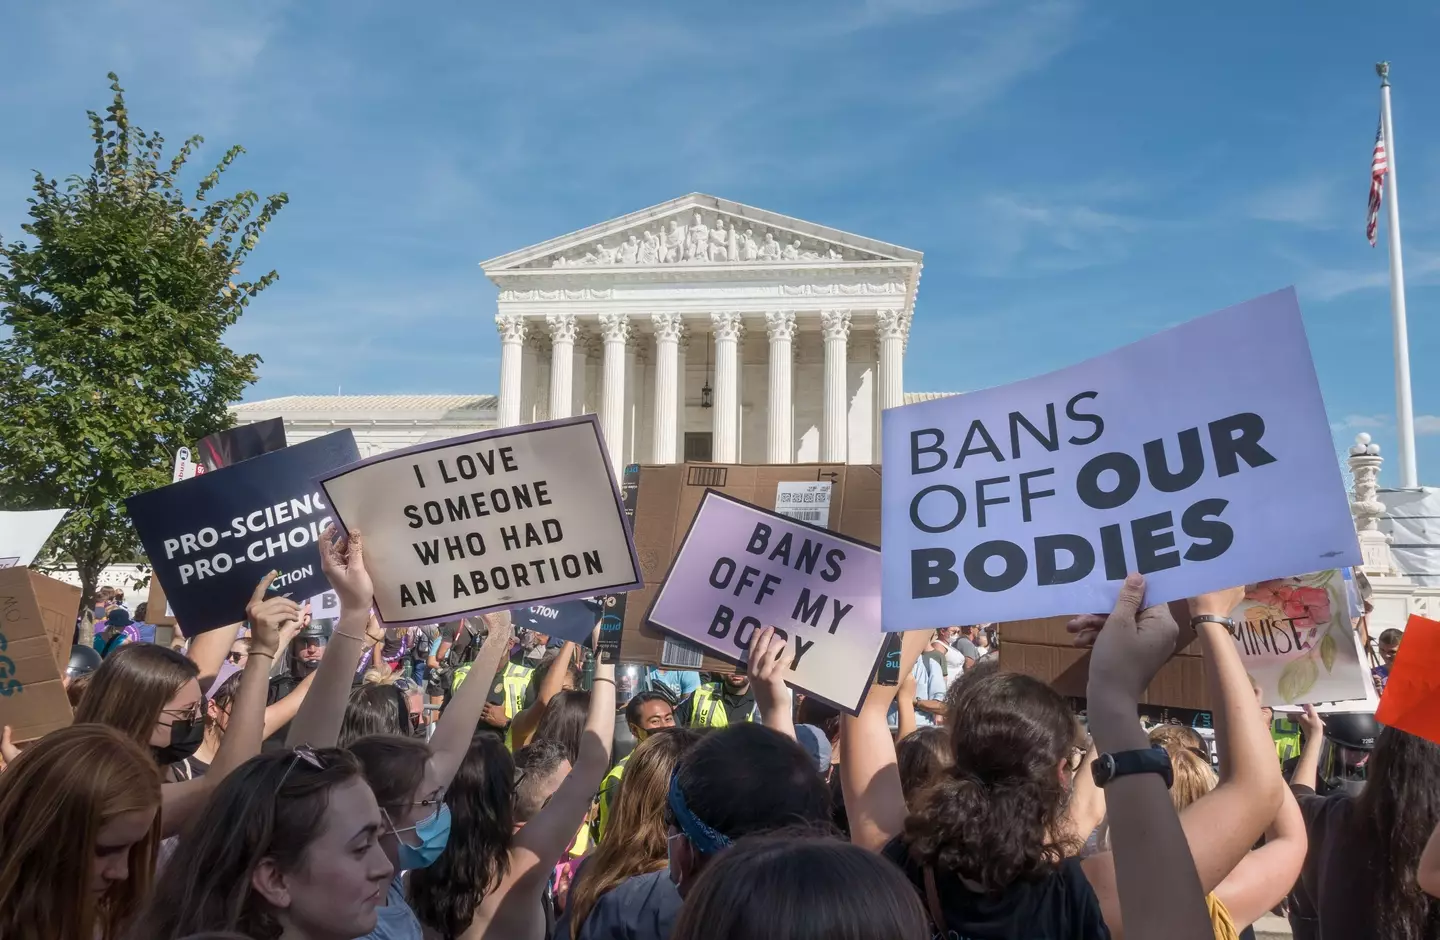 The overturning of Roe v Wade has led to widespread protests.